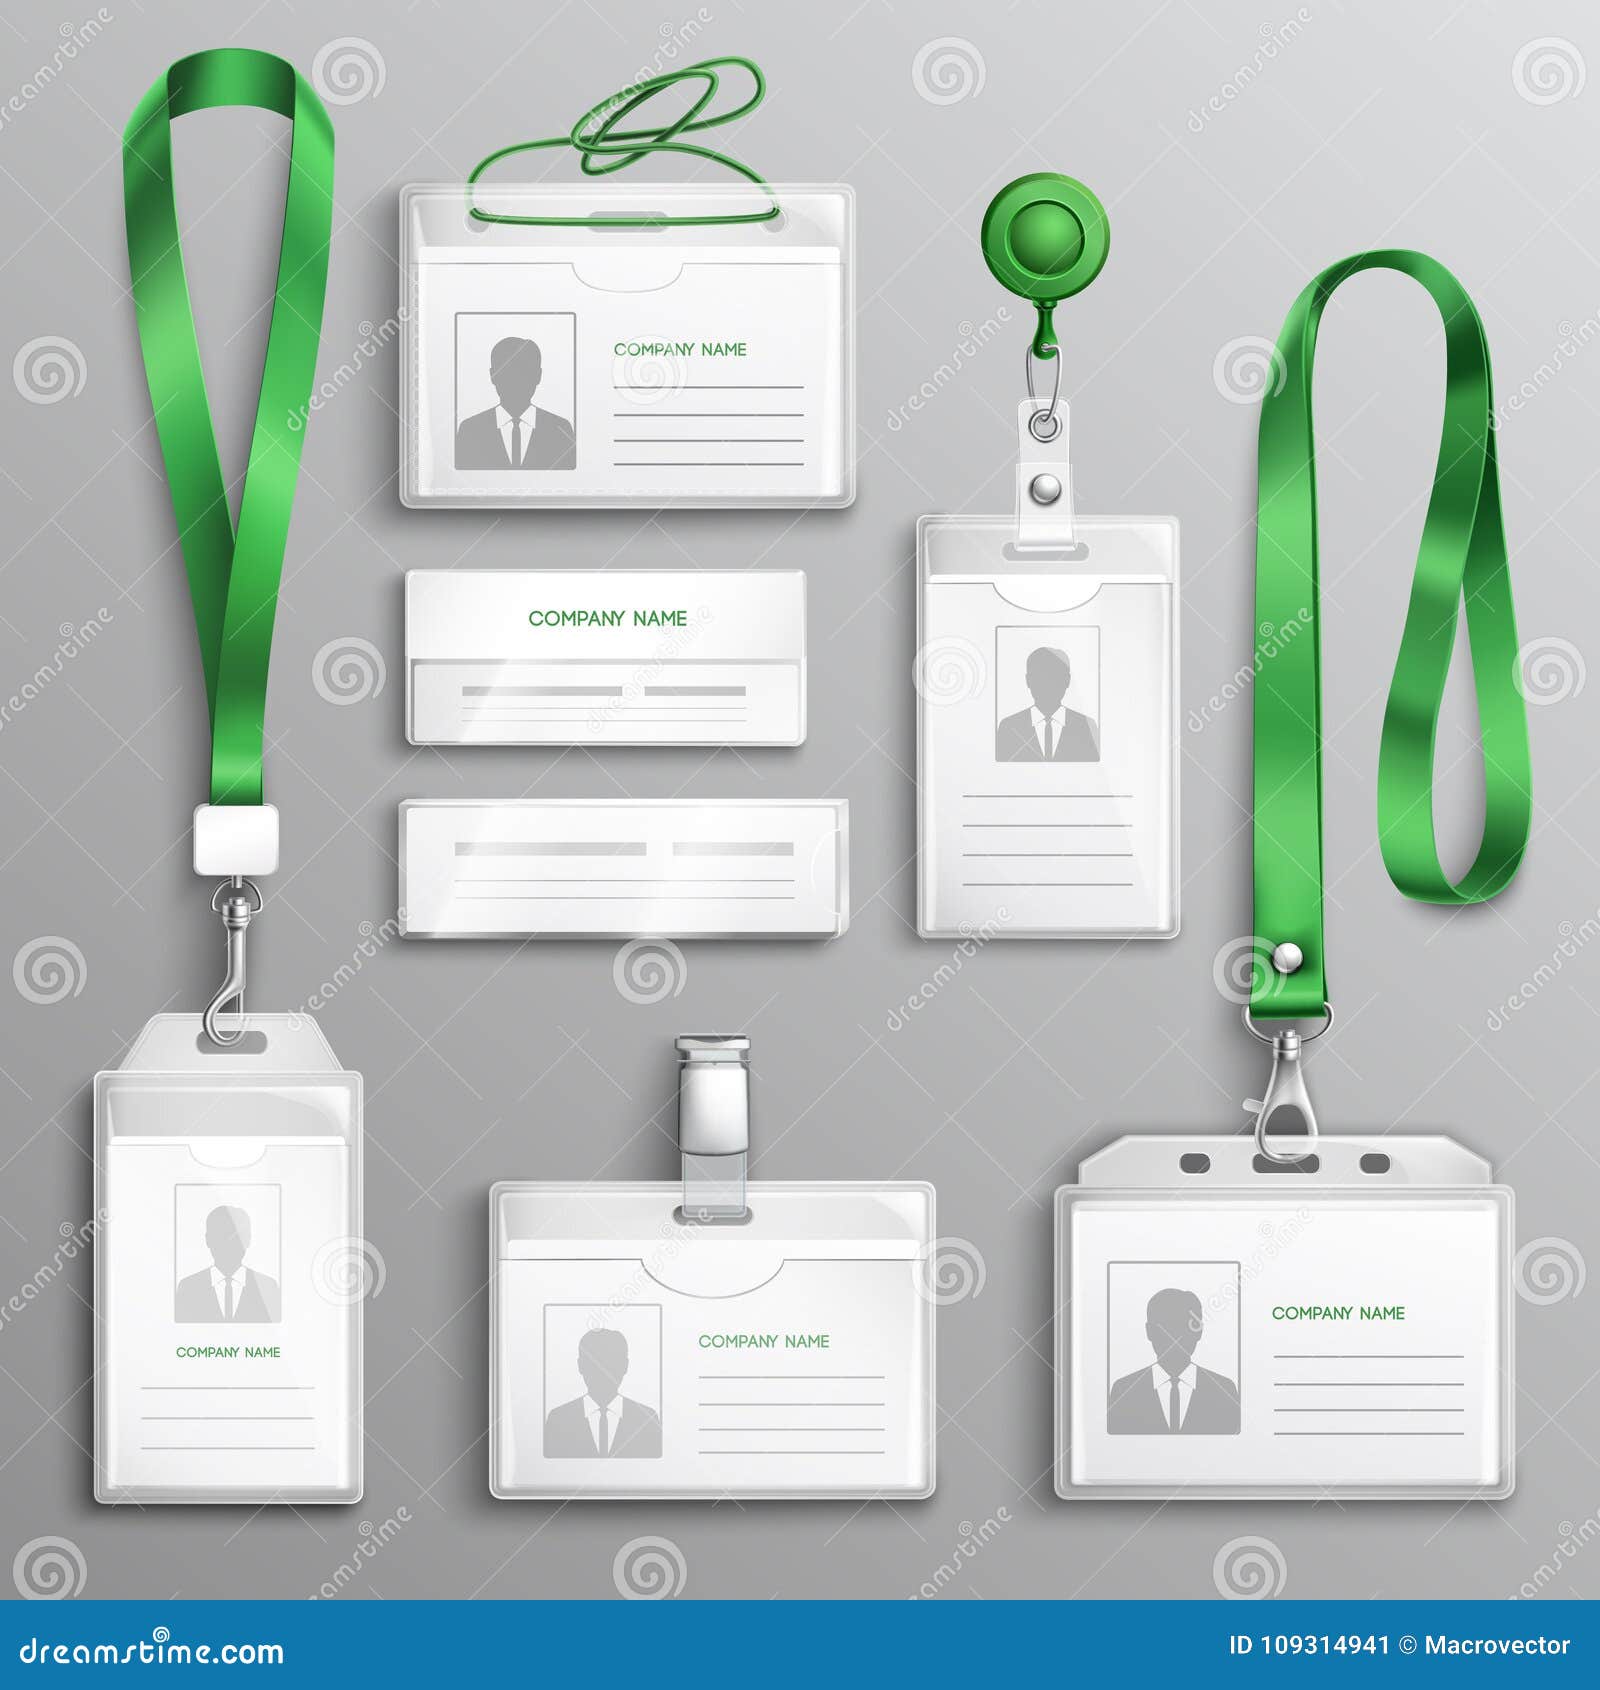 Green Volunteer Neck Lanyard & Green Double Sided ID Card Holder FREE POST lot 